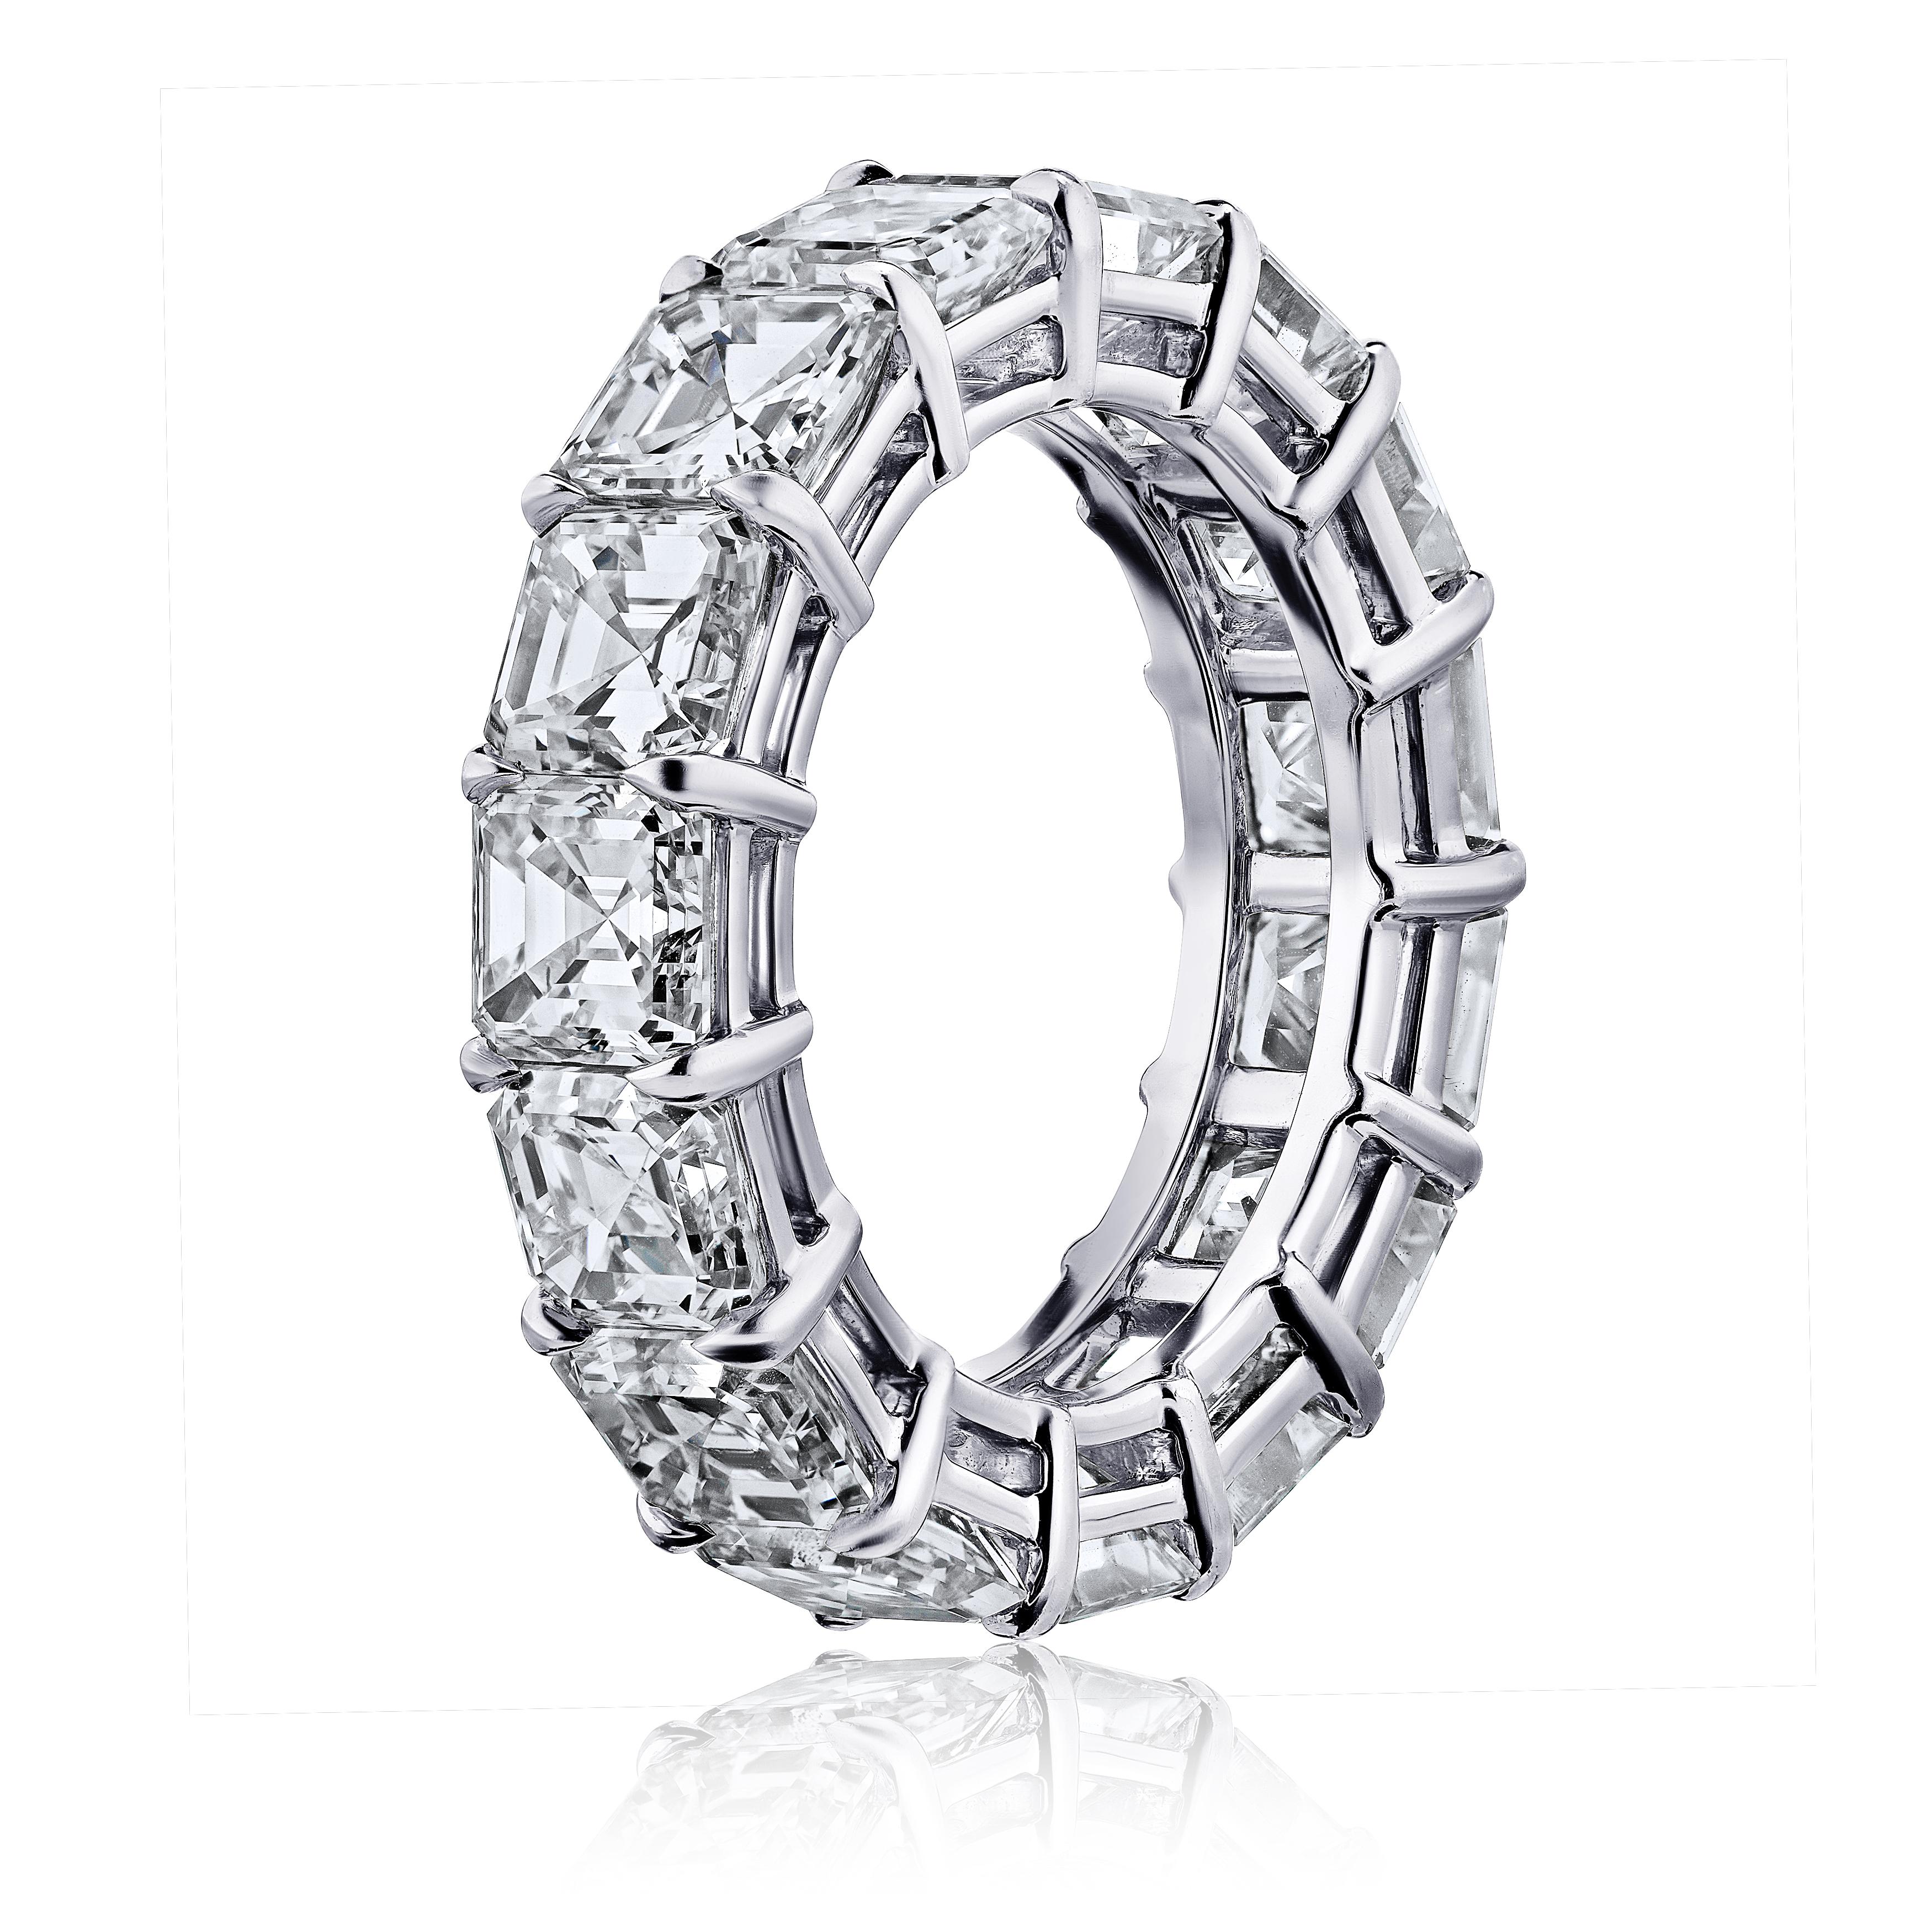 Asher Cut diamond ring platinum eternity band shared prong style with a gallery.
16 perfectly matched diamonds weighing a minimum of 6.75 cts. G.I.A certificates for each diamond . Ranging from D-F in color . VVS1-VS2 in clarity .
Lab tested